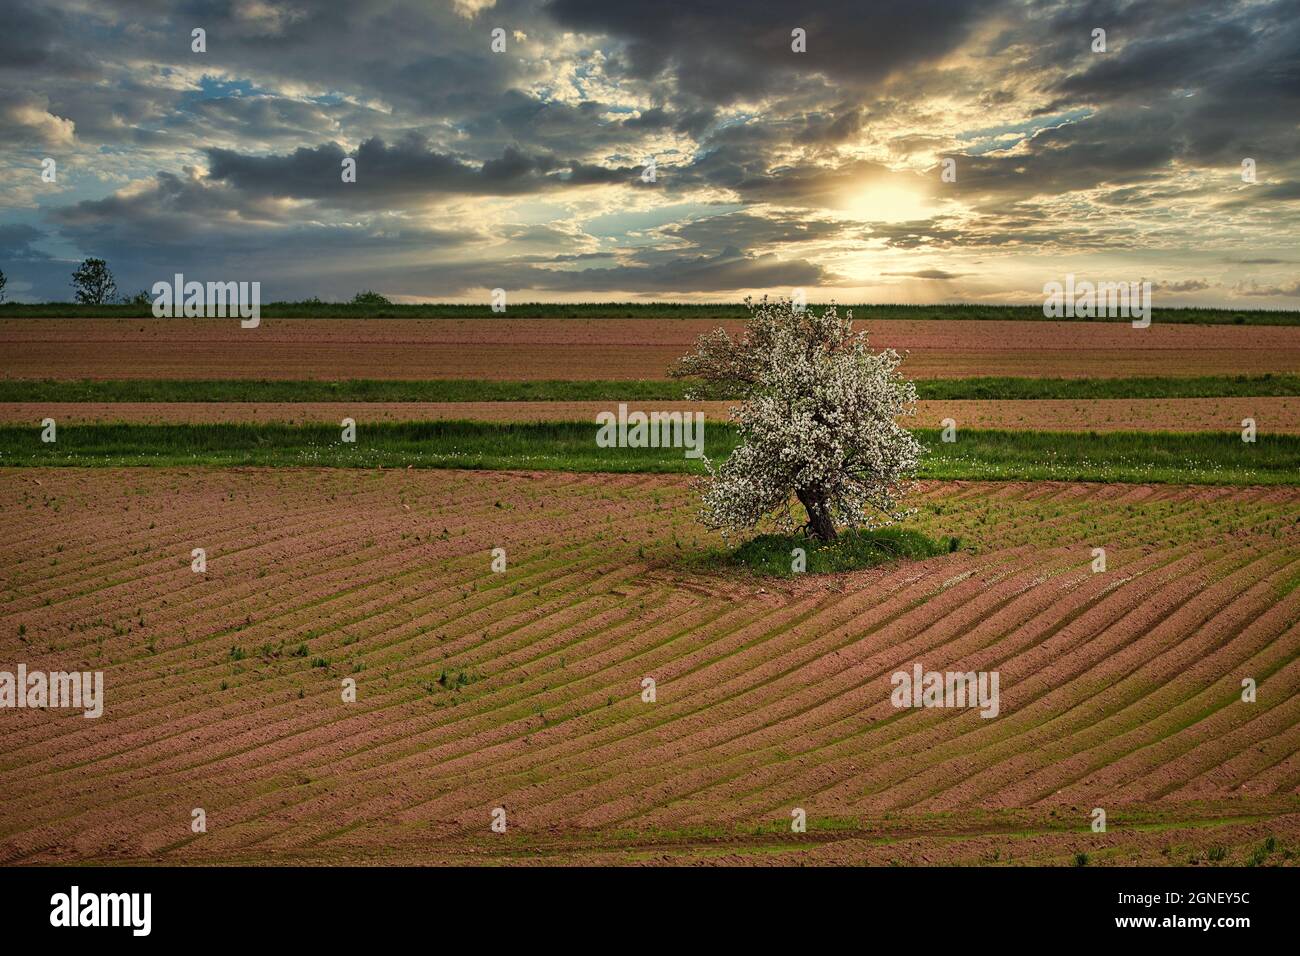 Old apple tree flowering in a field of potatoes in rural Prince Edward Island, Canada. Stock Photo